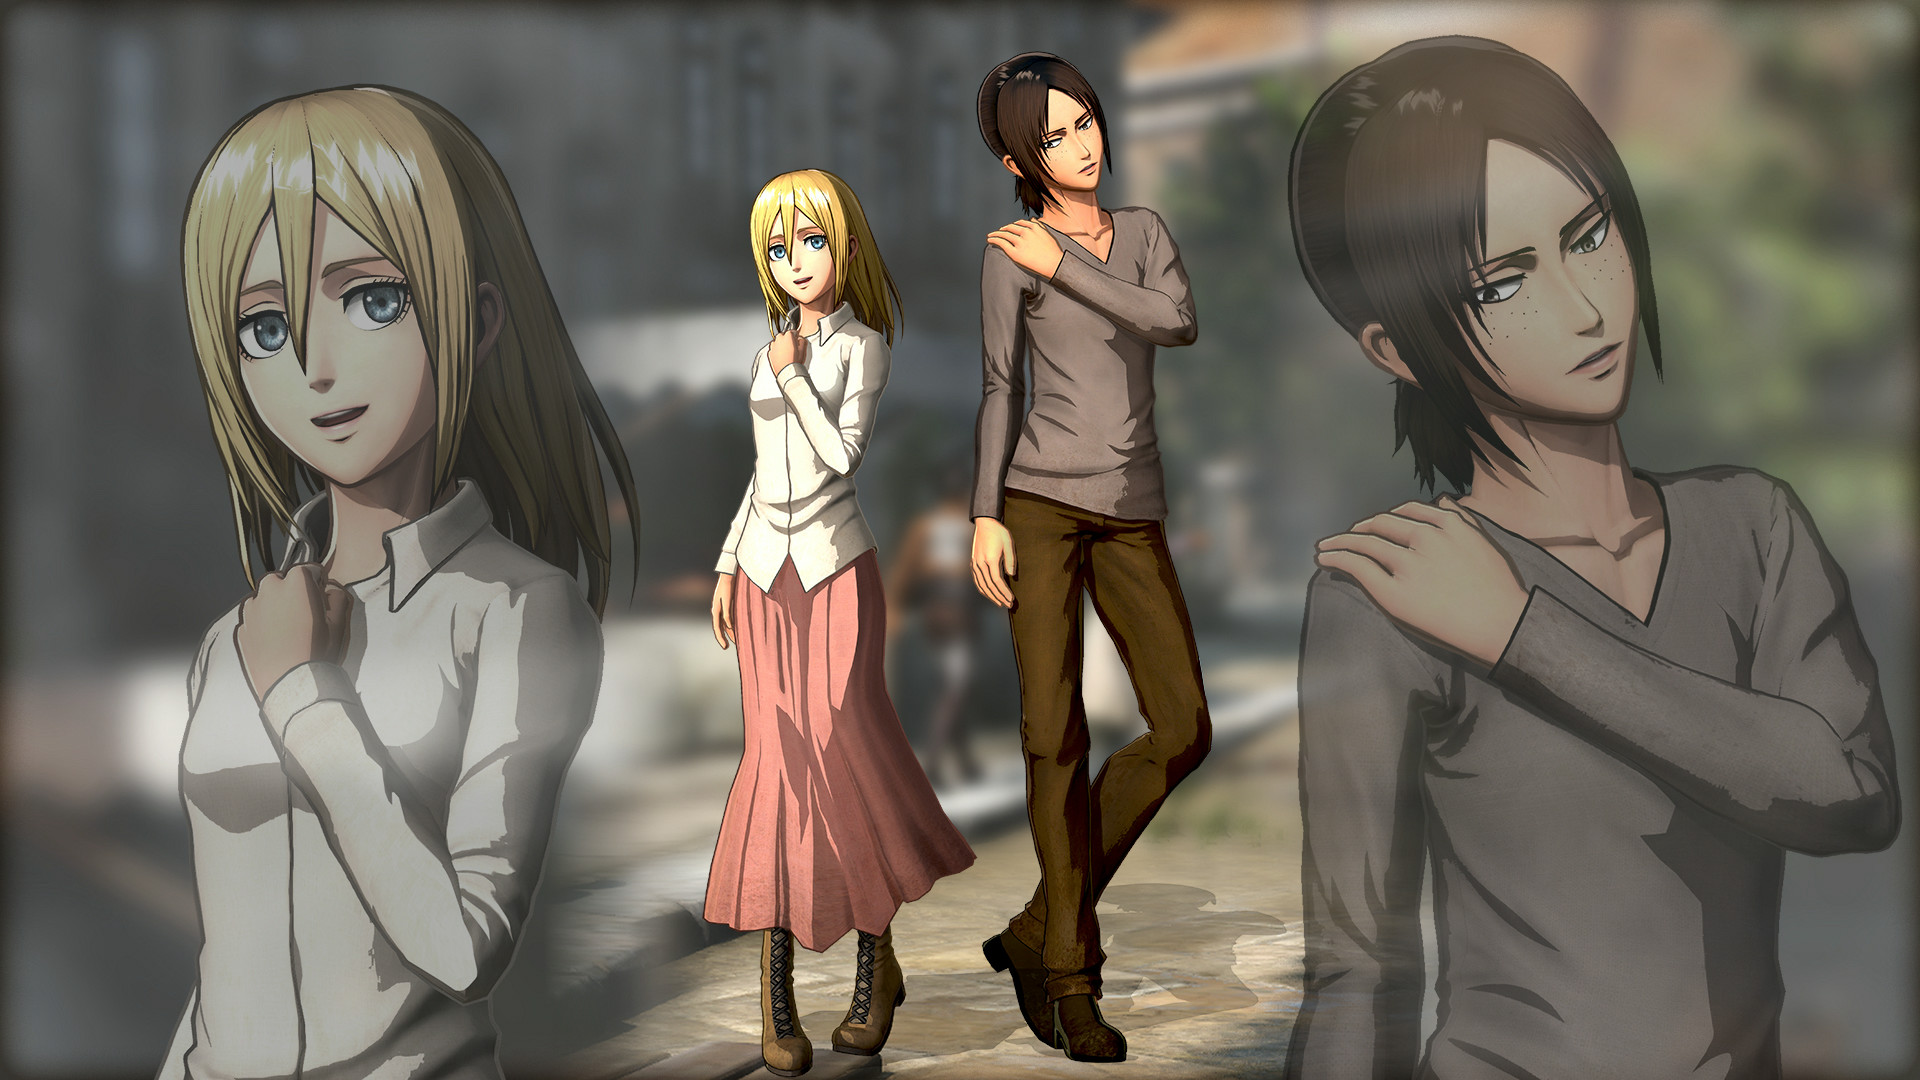 Attack on Titan 2: Christa & Ymir "Plain clothes" Outfit Early Release